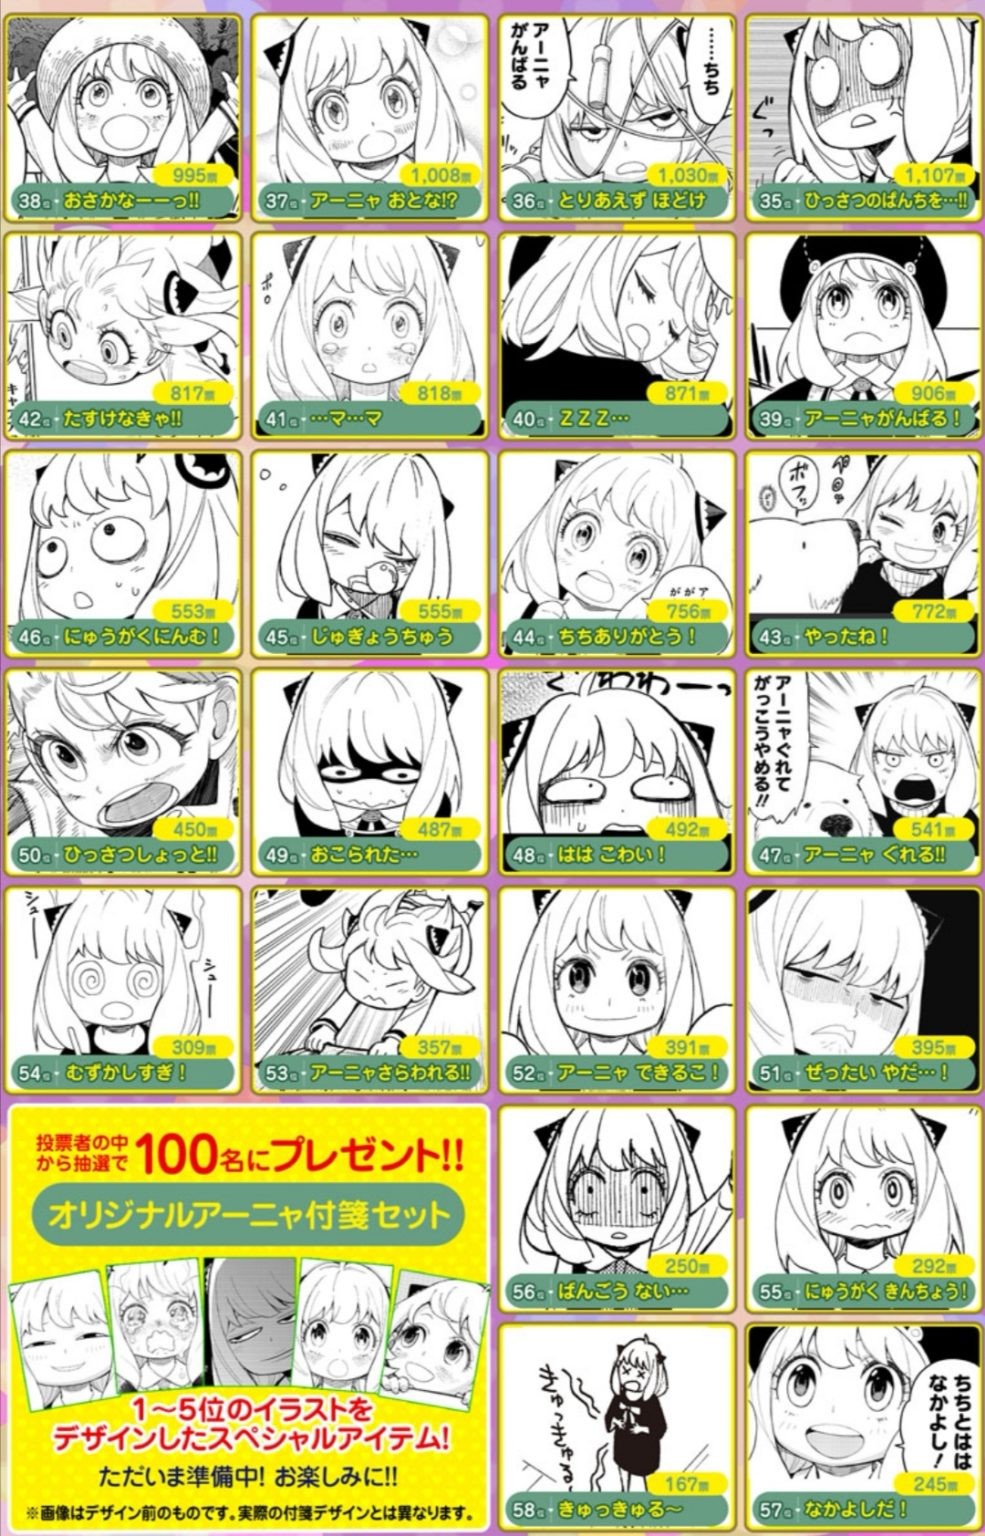 Anya's facial expressions from spy x family